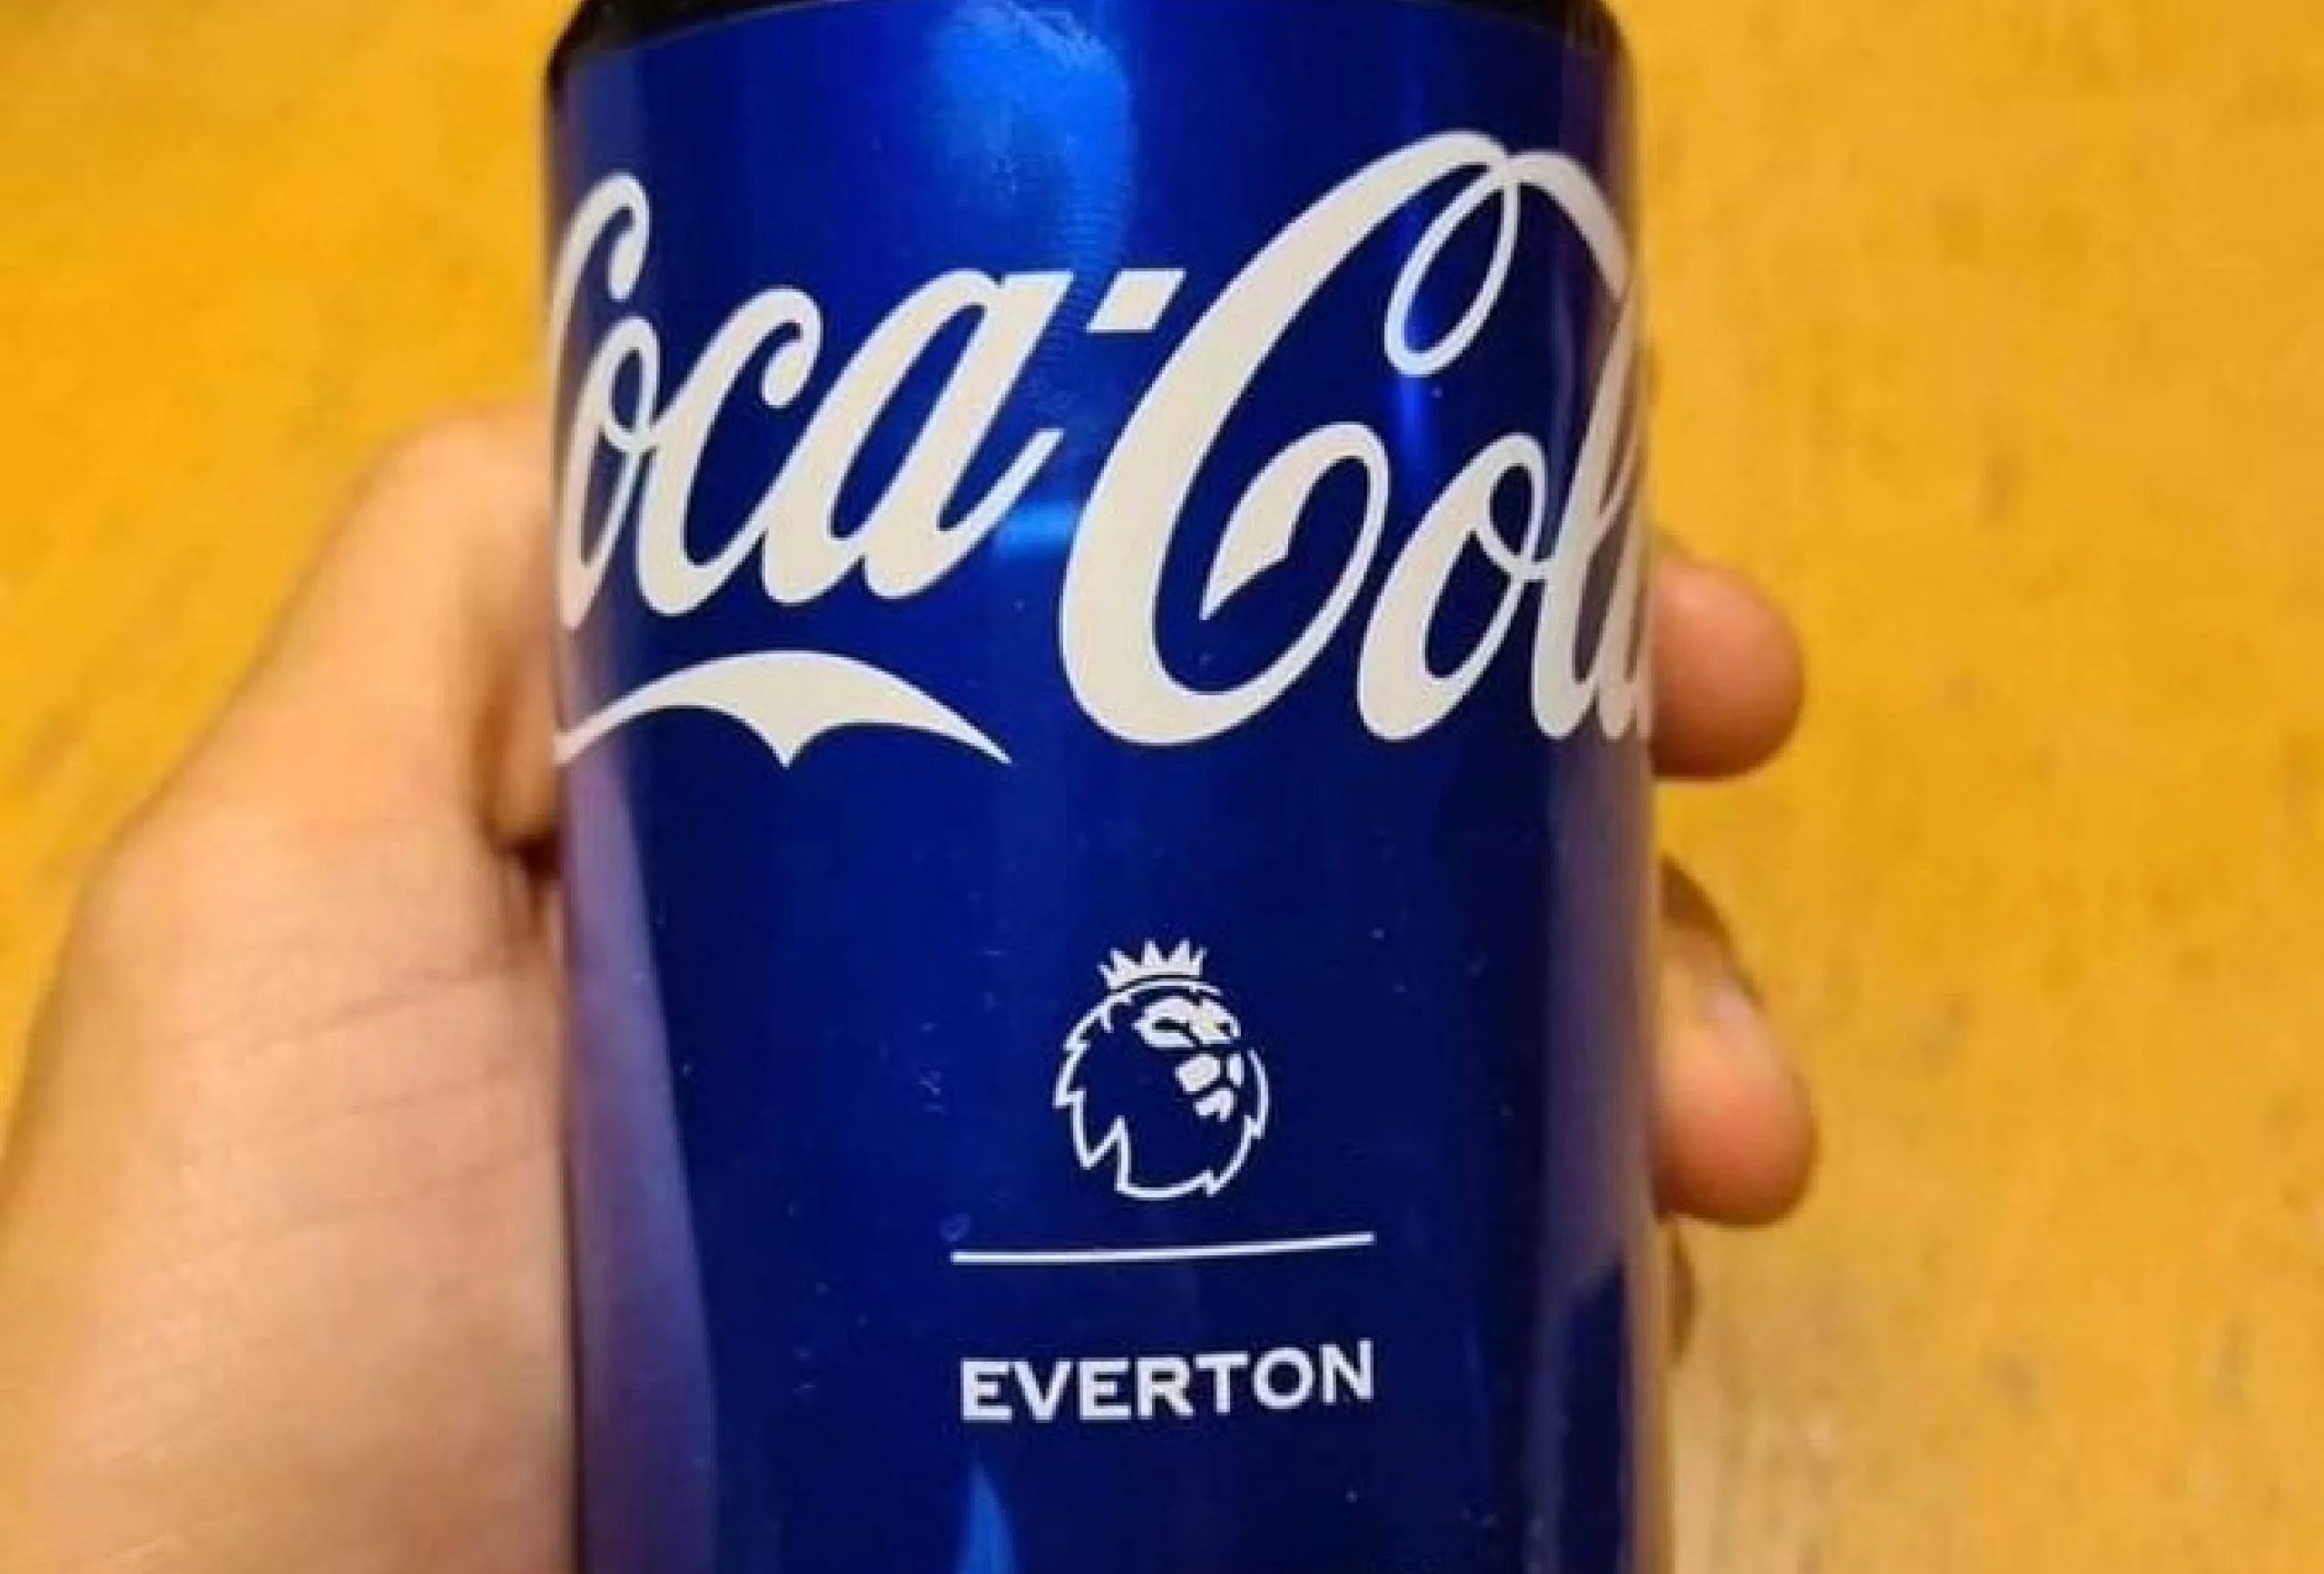 Coke cans with Everton label are now being sold in Colombia after James Rodriguez's arrival